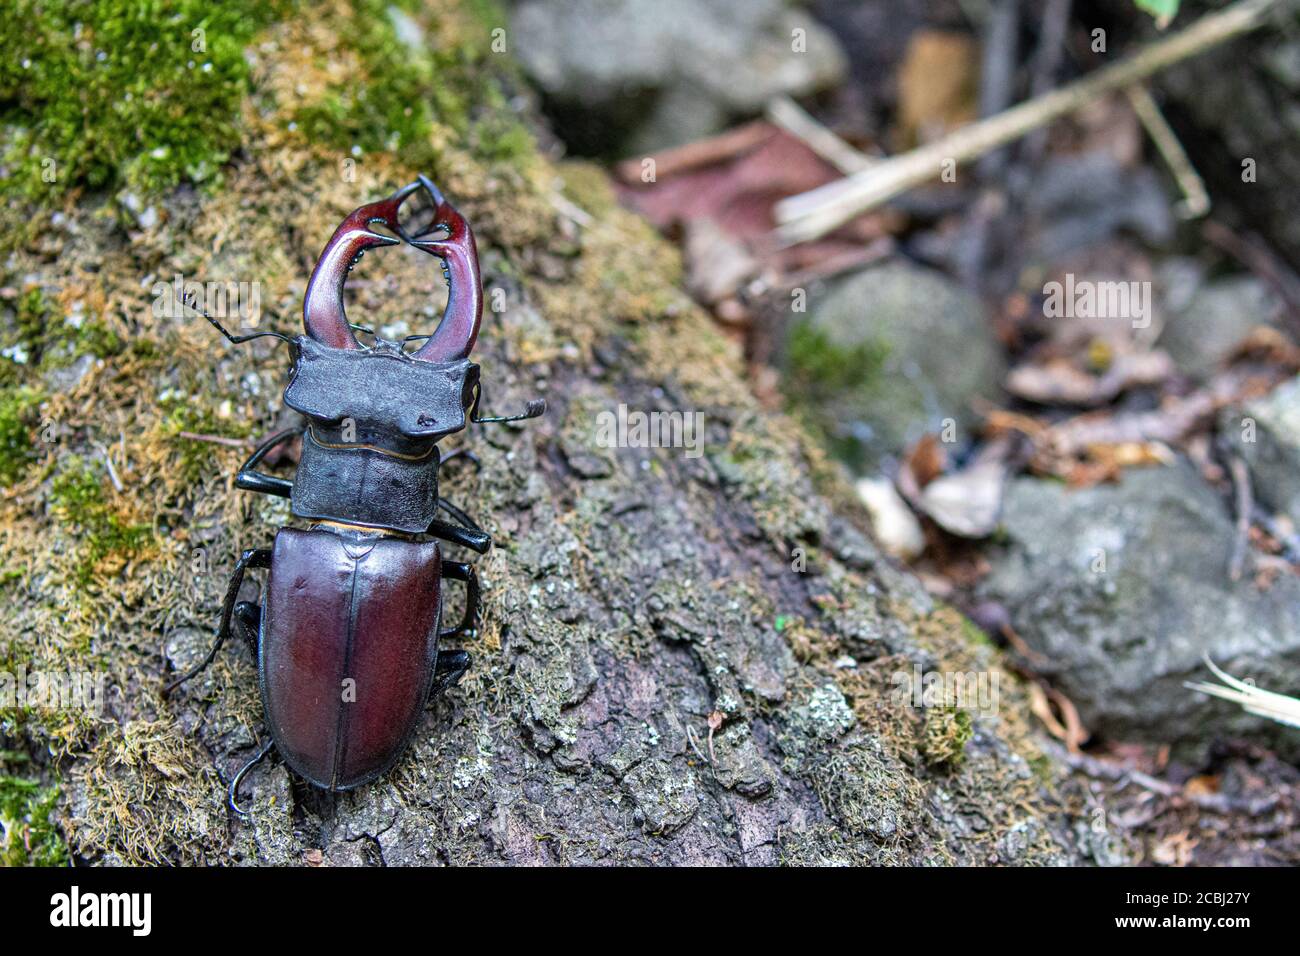 This impressive male stag beetle is sitting on its' breeding tree (Quercus sp.) Stock Photo